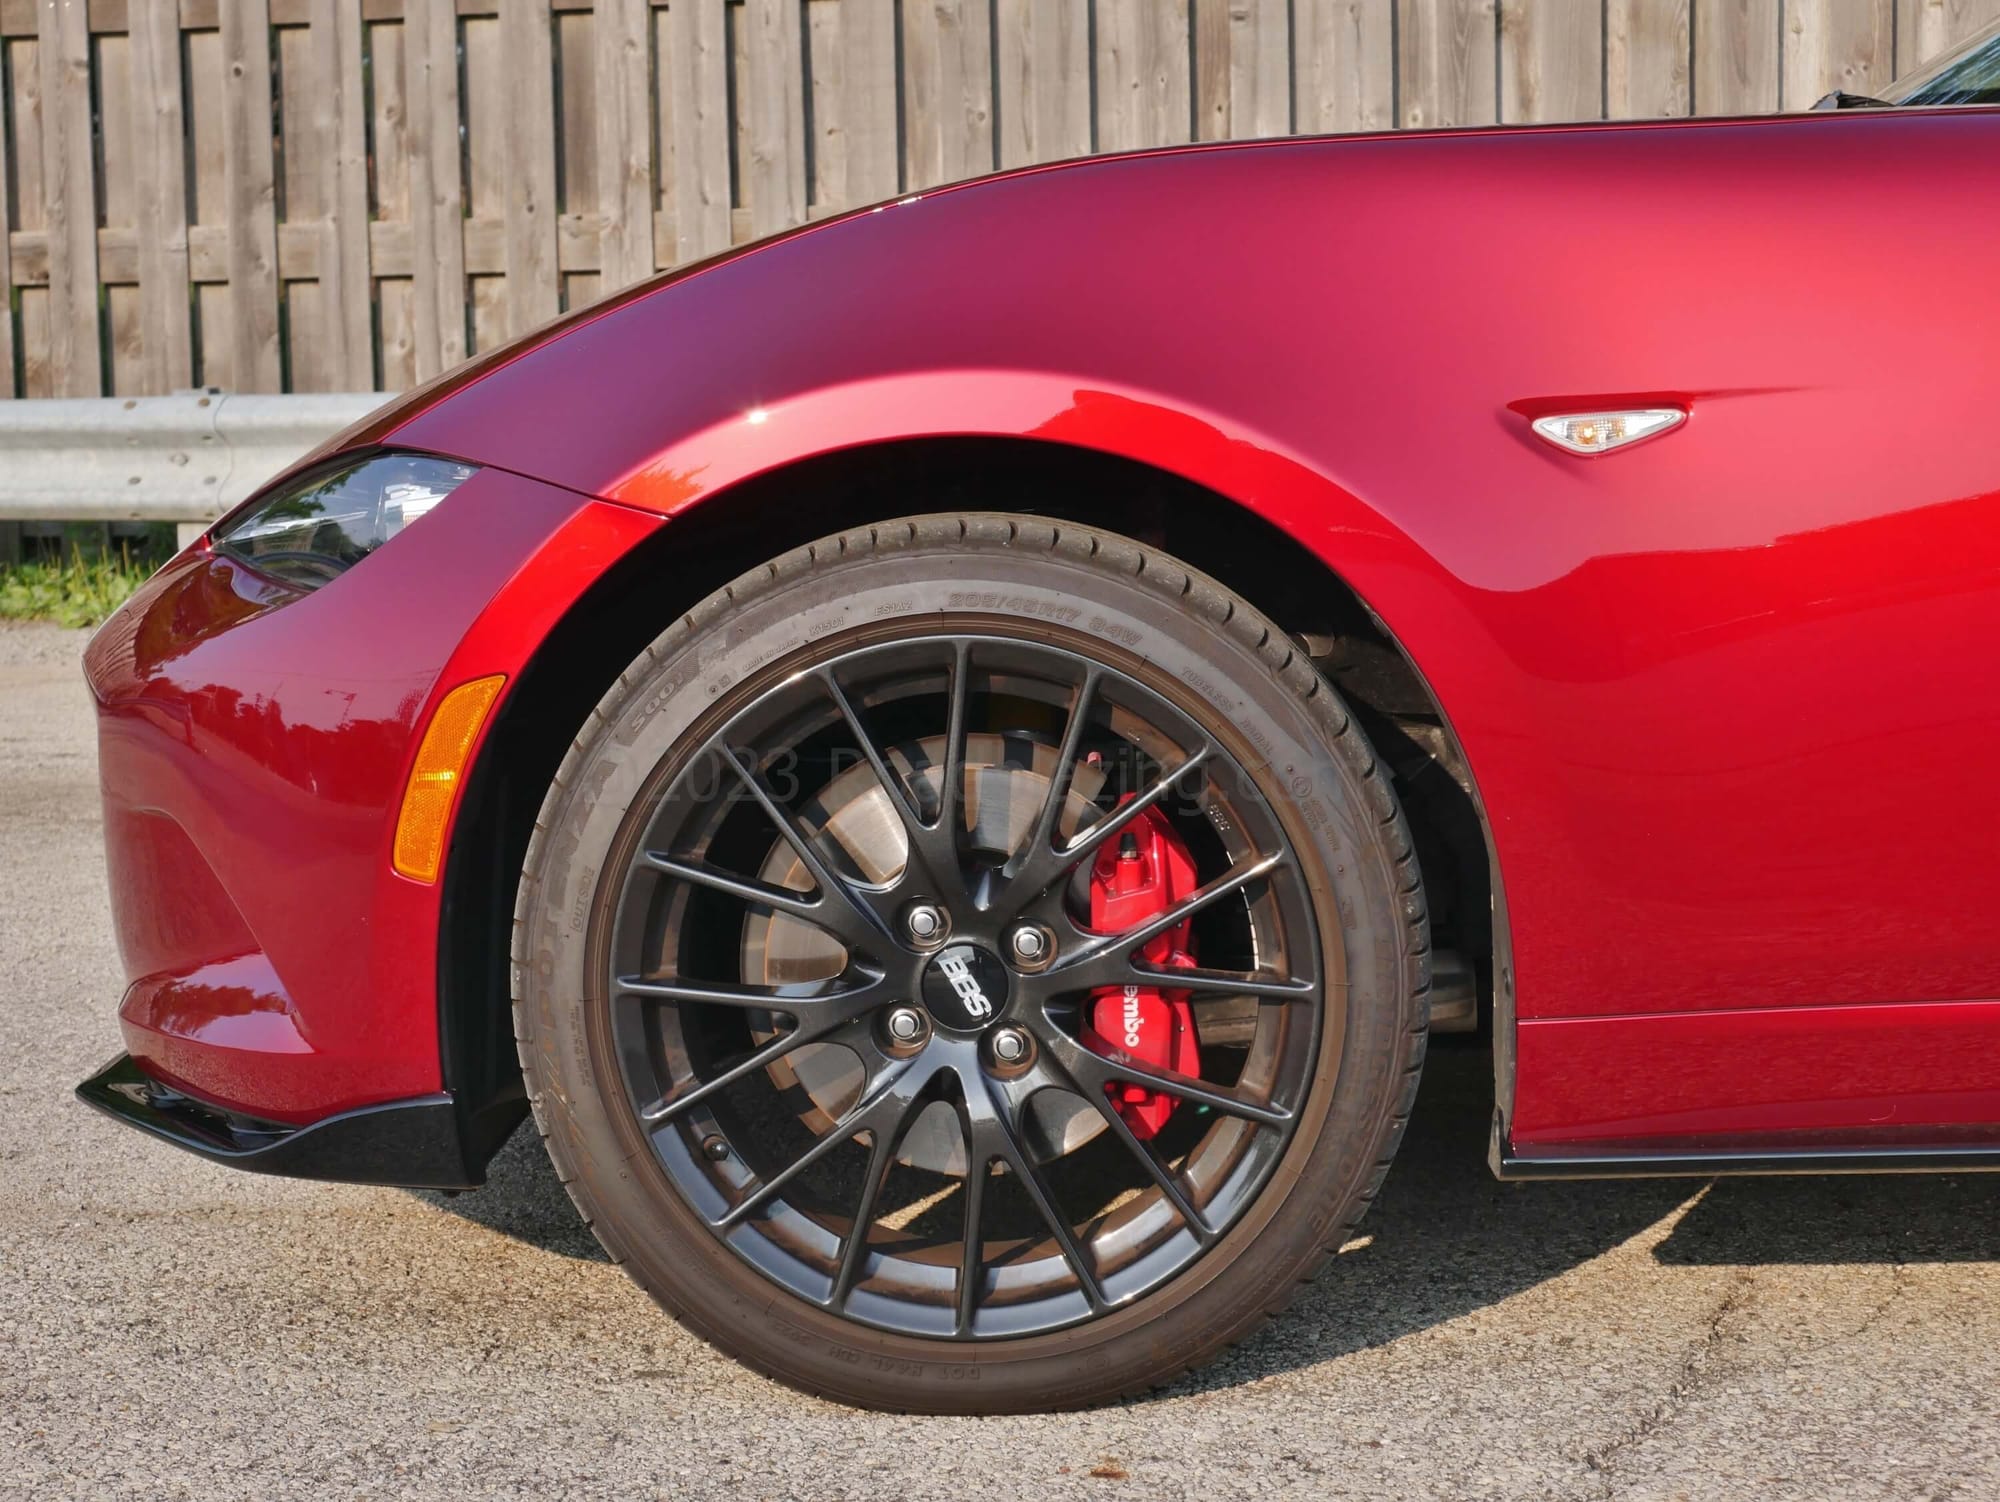 2023 Mazda MX-5 Miata RF Club: 4 piston fixed Brembo front brake calipers and lighter forged BBS 17" wheels are part of the Club upfitting.